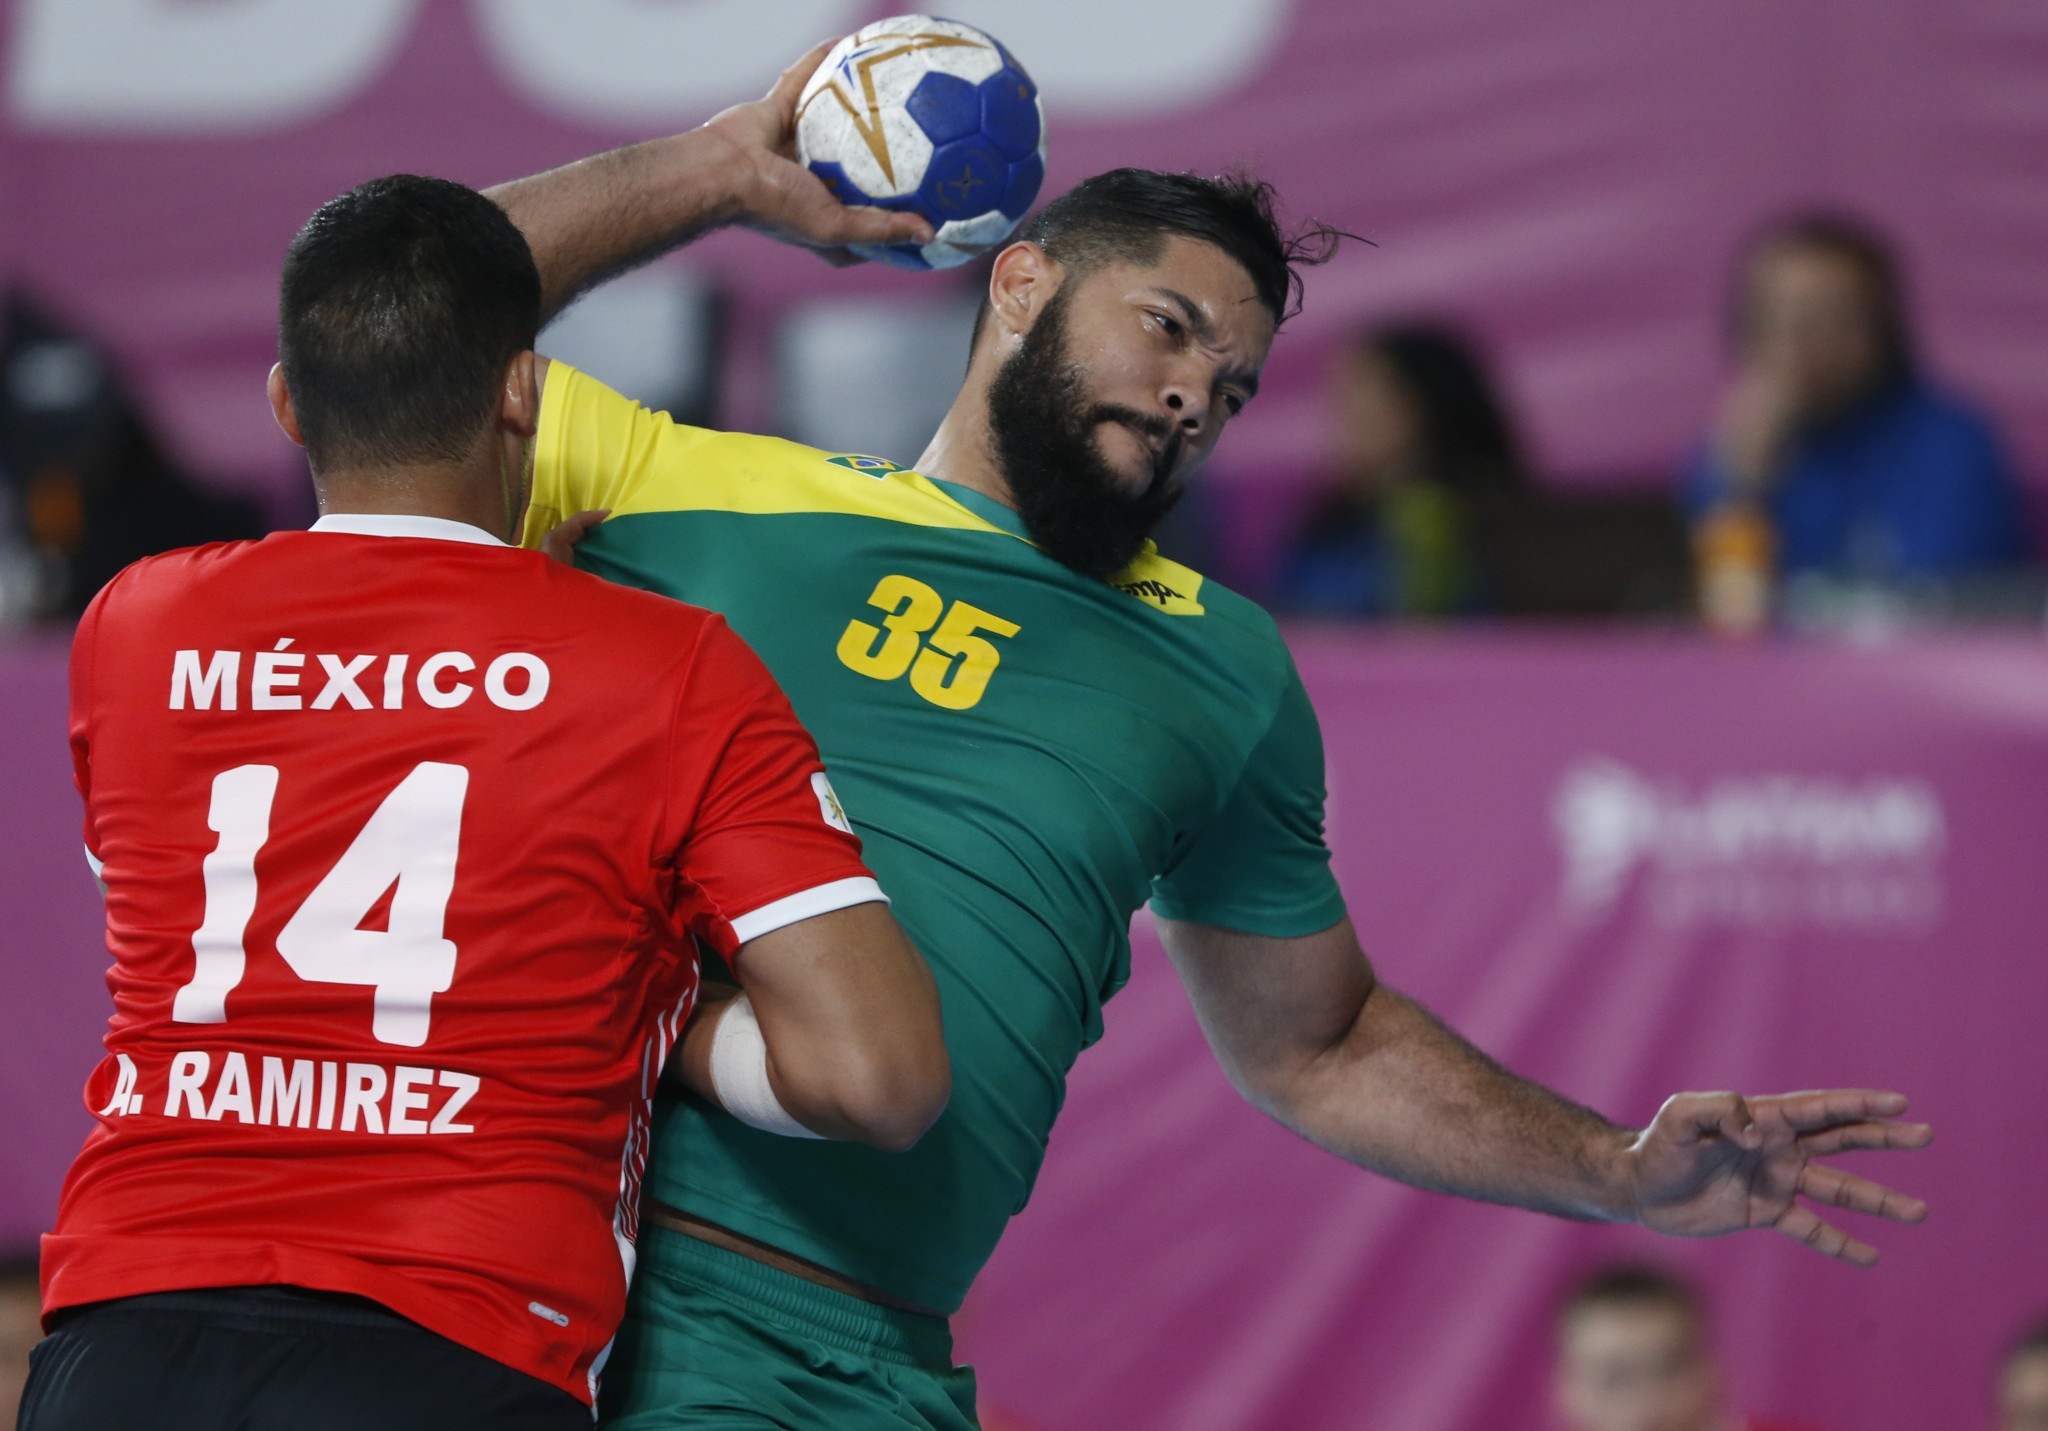 Brazil were the bronze medallists after defeating Mexico ©Lima 2019